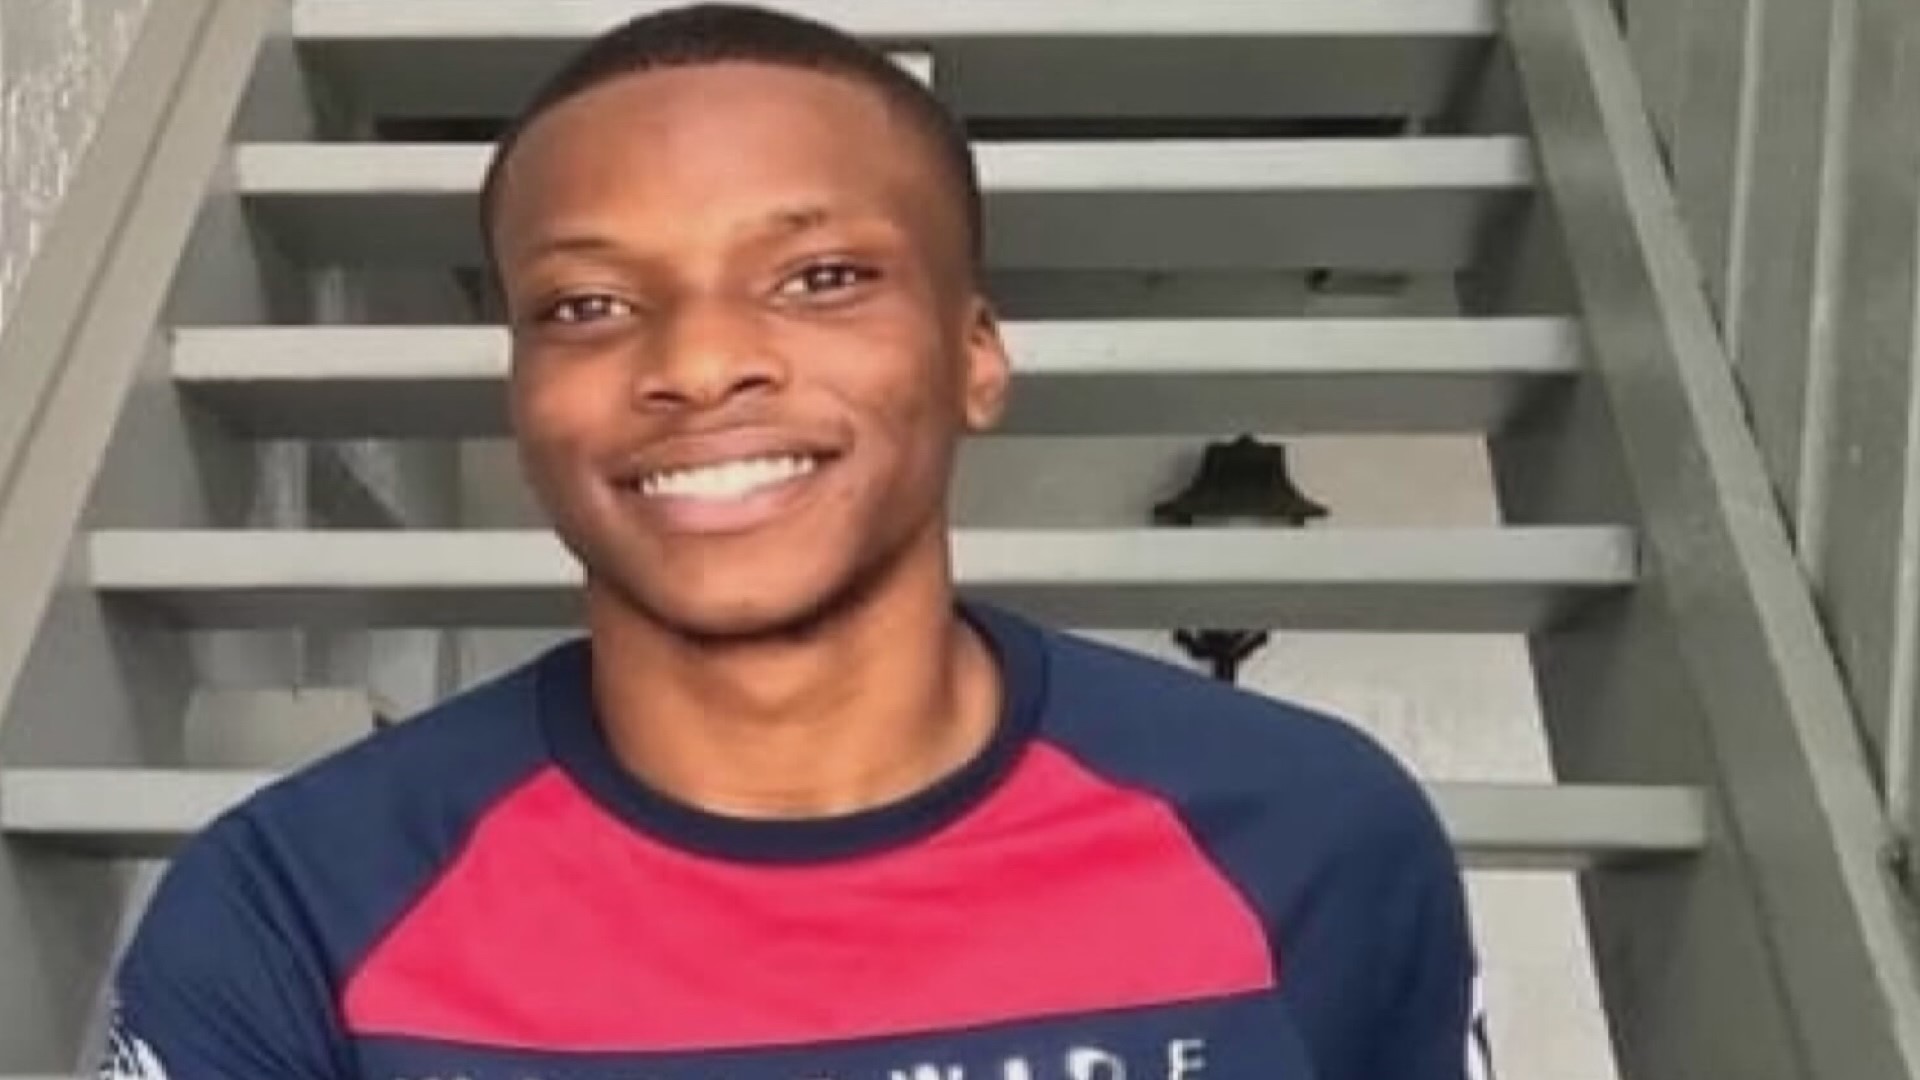 22-year-old Jamee Johnson was shot and killed by former JSO officer Josue Garriga during a 2019 traffic stop in Jacksonville.